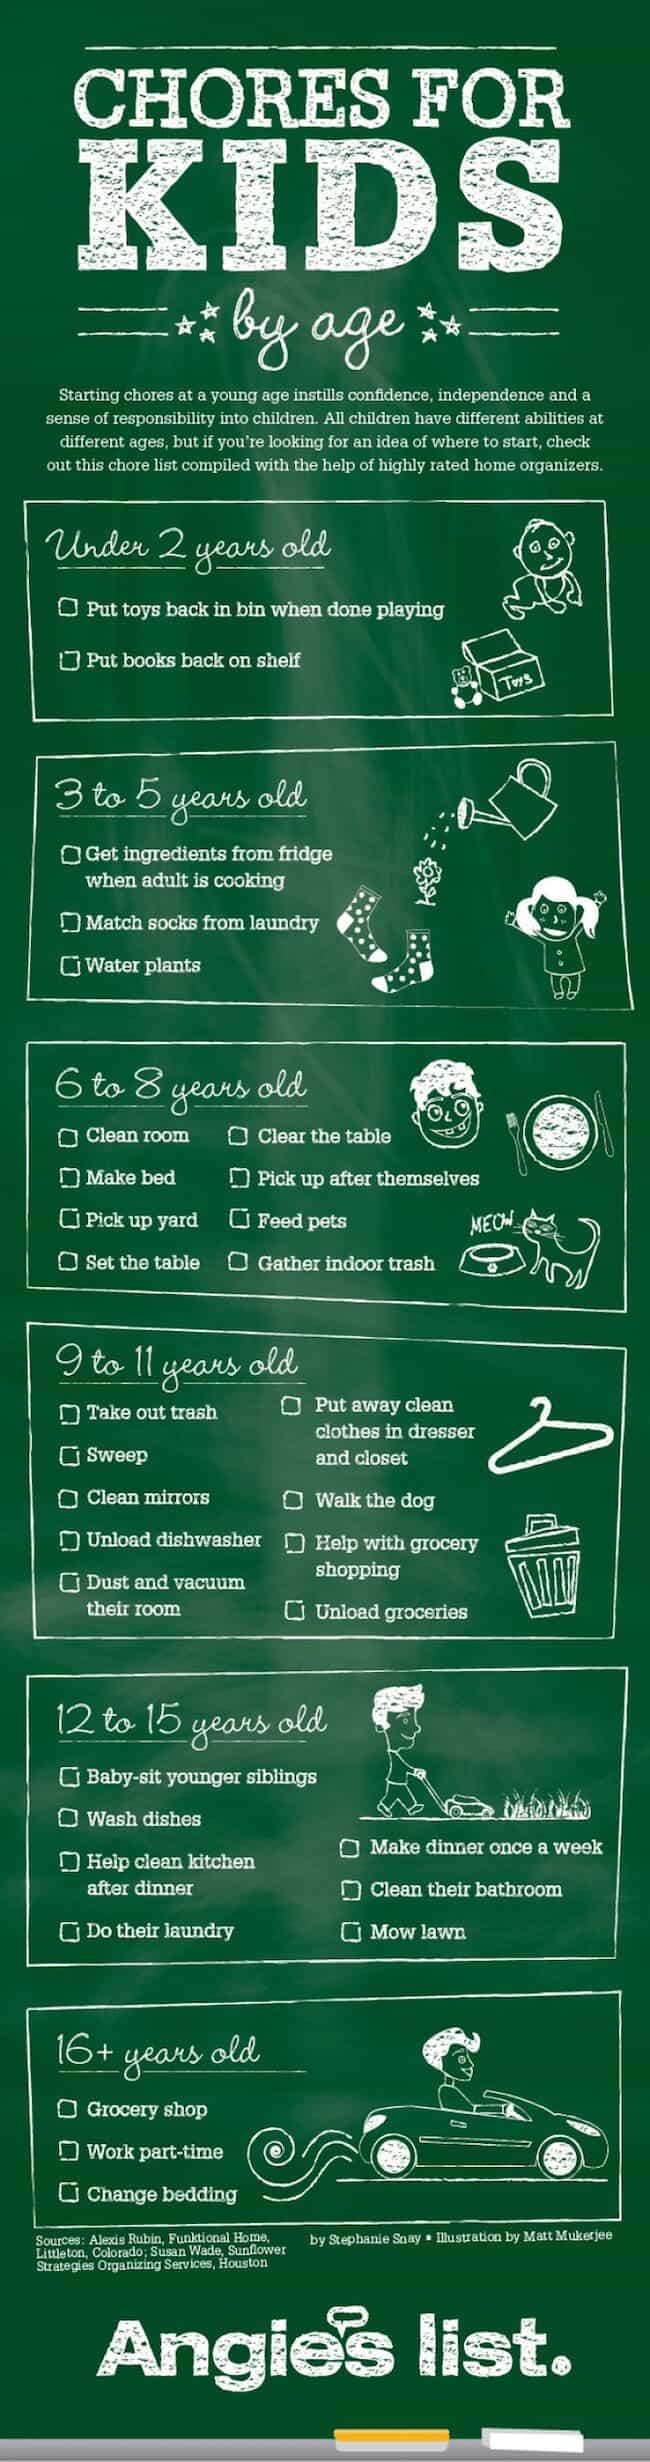 Chores for kids by age from Angies List